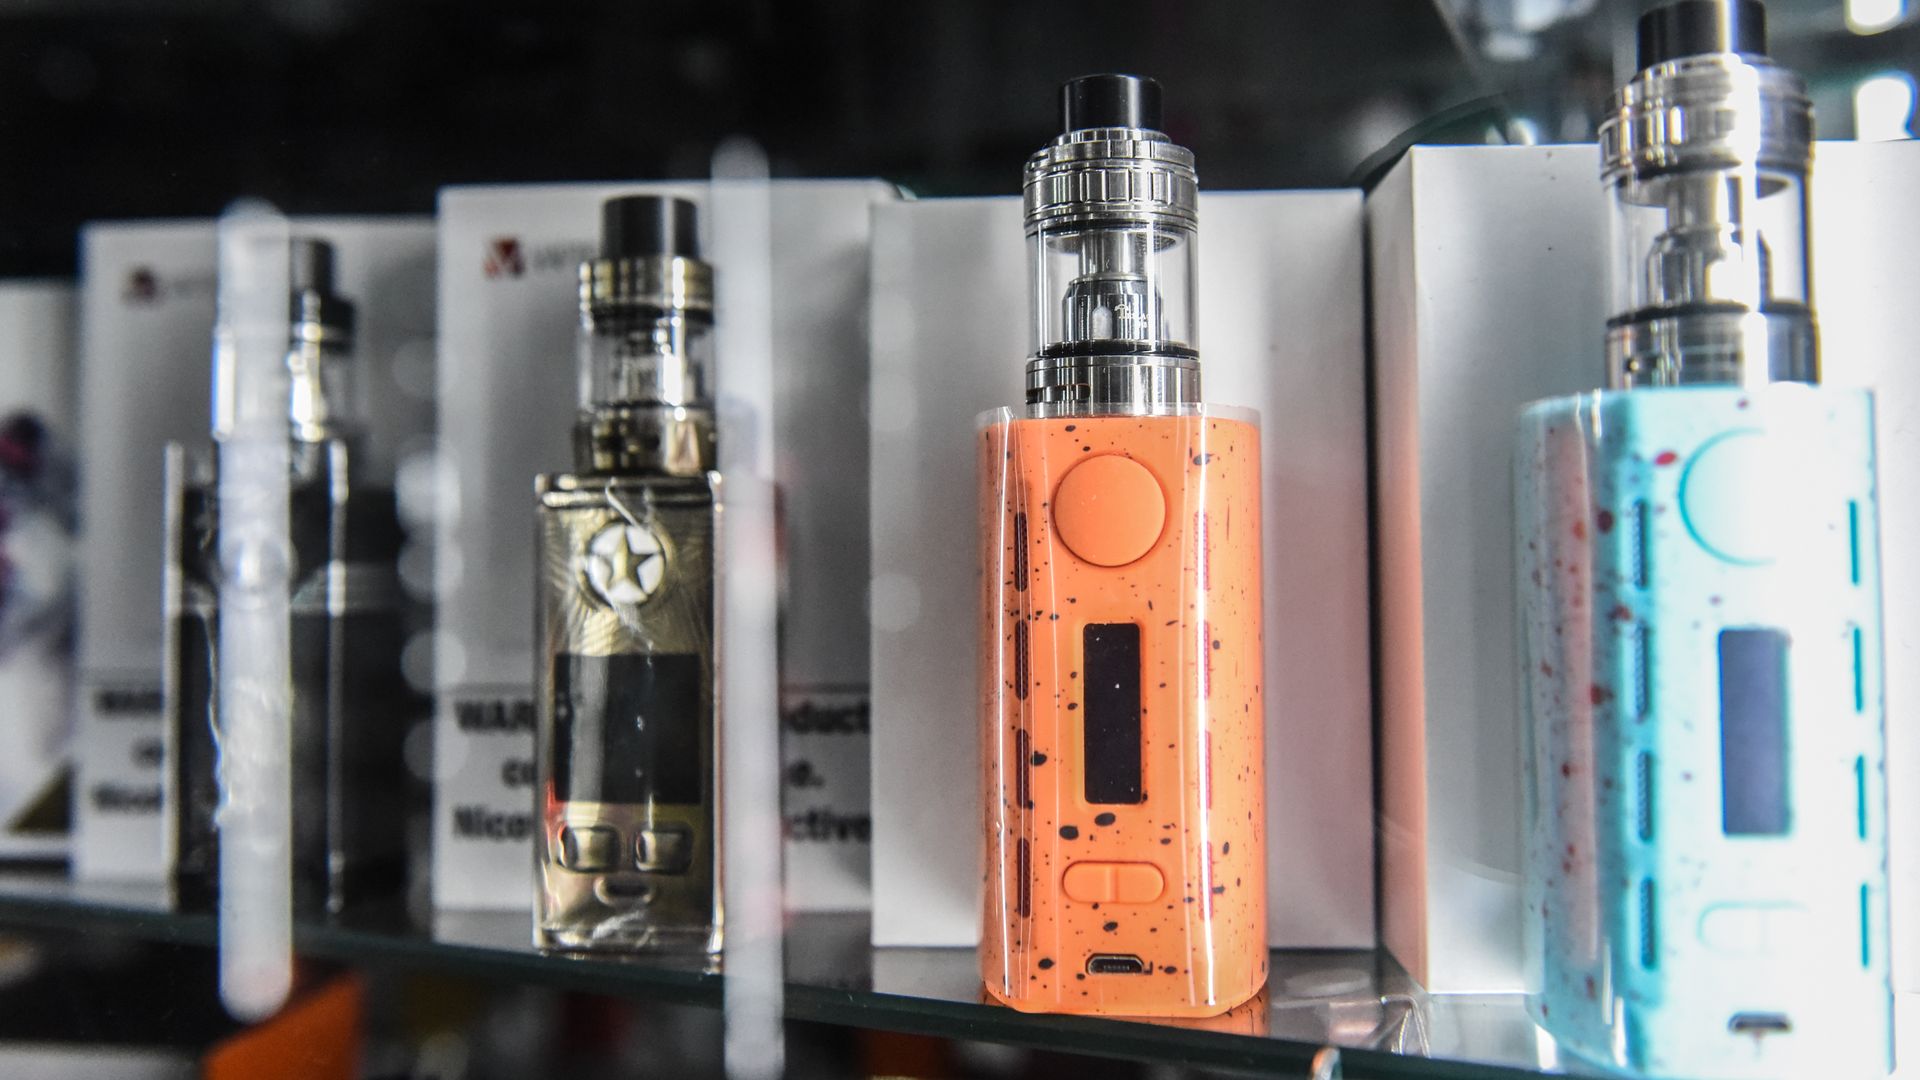 Vaping and e-cigarette products